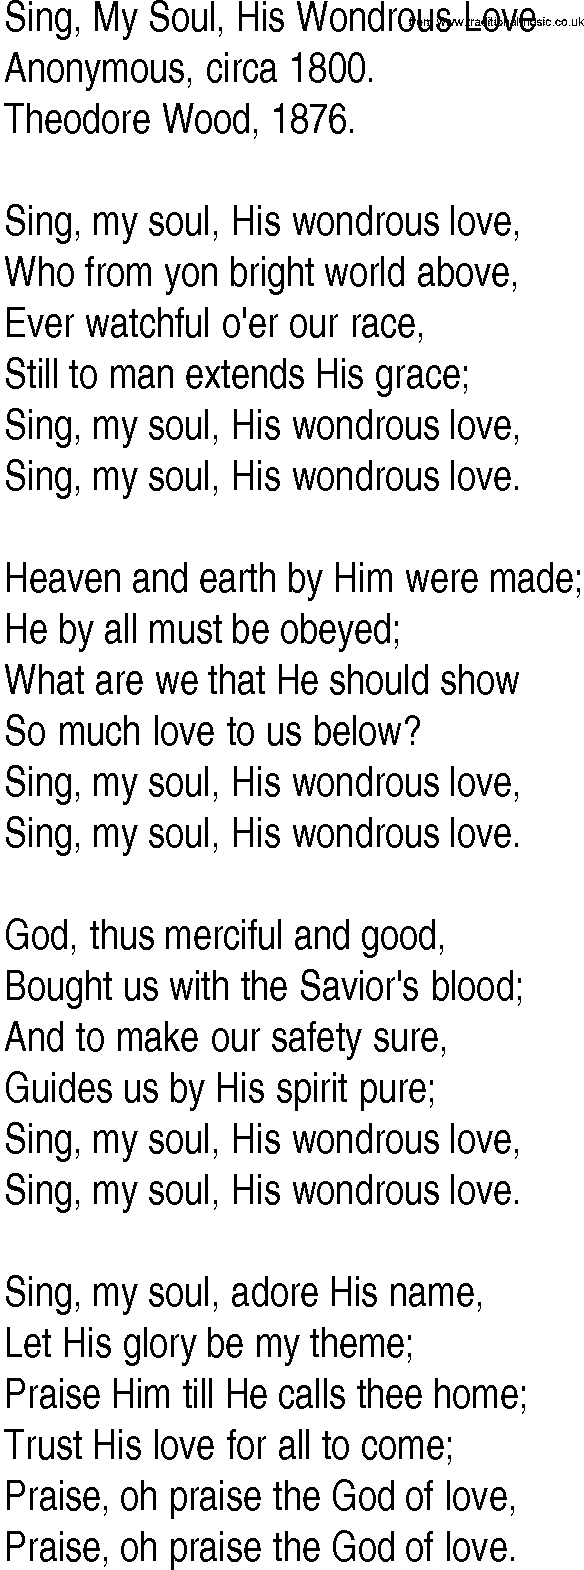 Hymn and Gospel Song: Sing, My Soul, His Wondrous Love by Anonymous circa lyrics